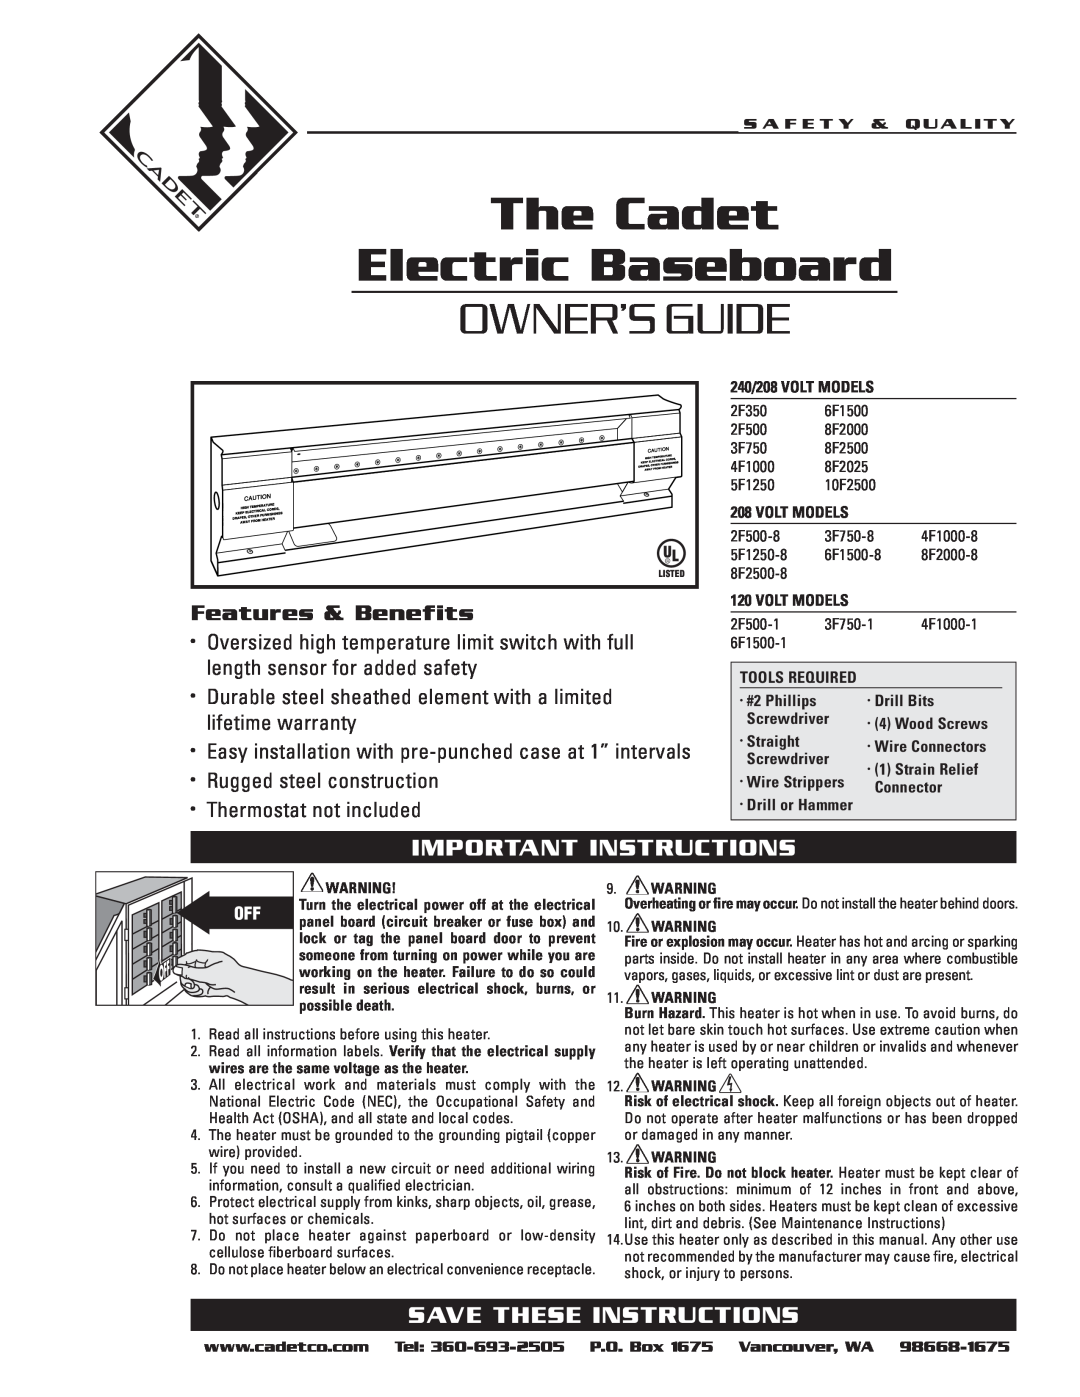 Cadet 4F1000, 2F350 warranty The Cadet Electric Baseboard, Owner’S Guide, Important Instructions, Save These Instructions 